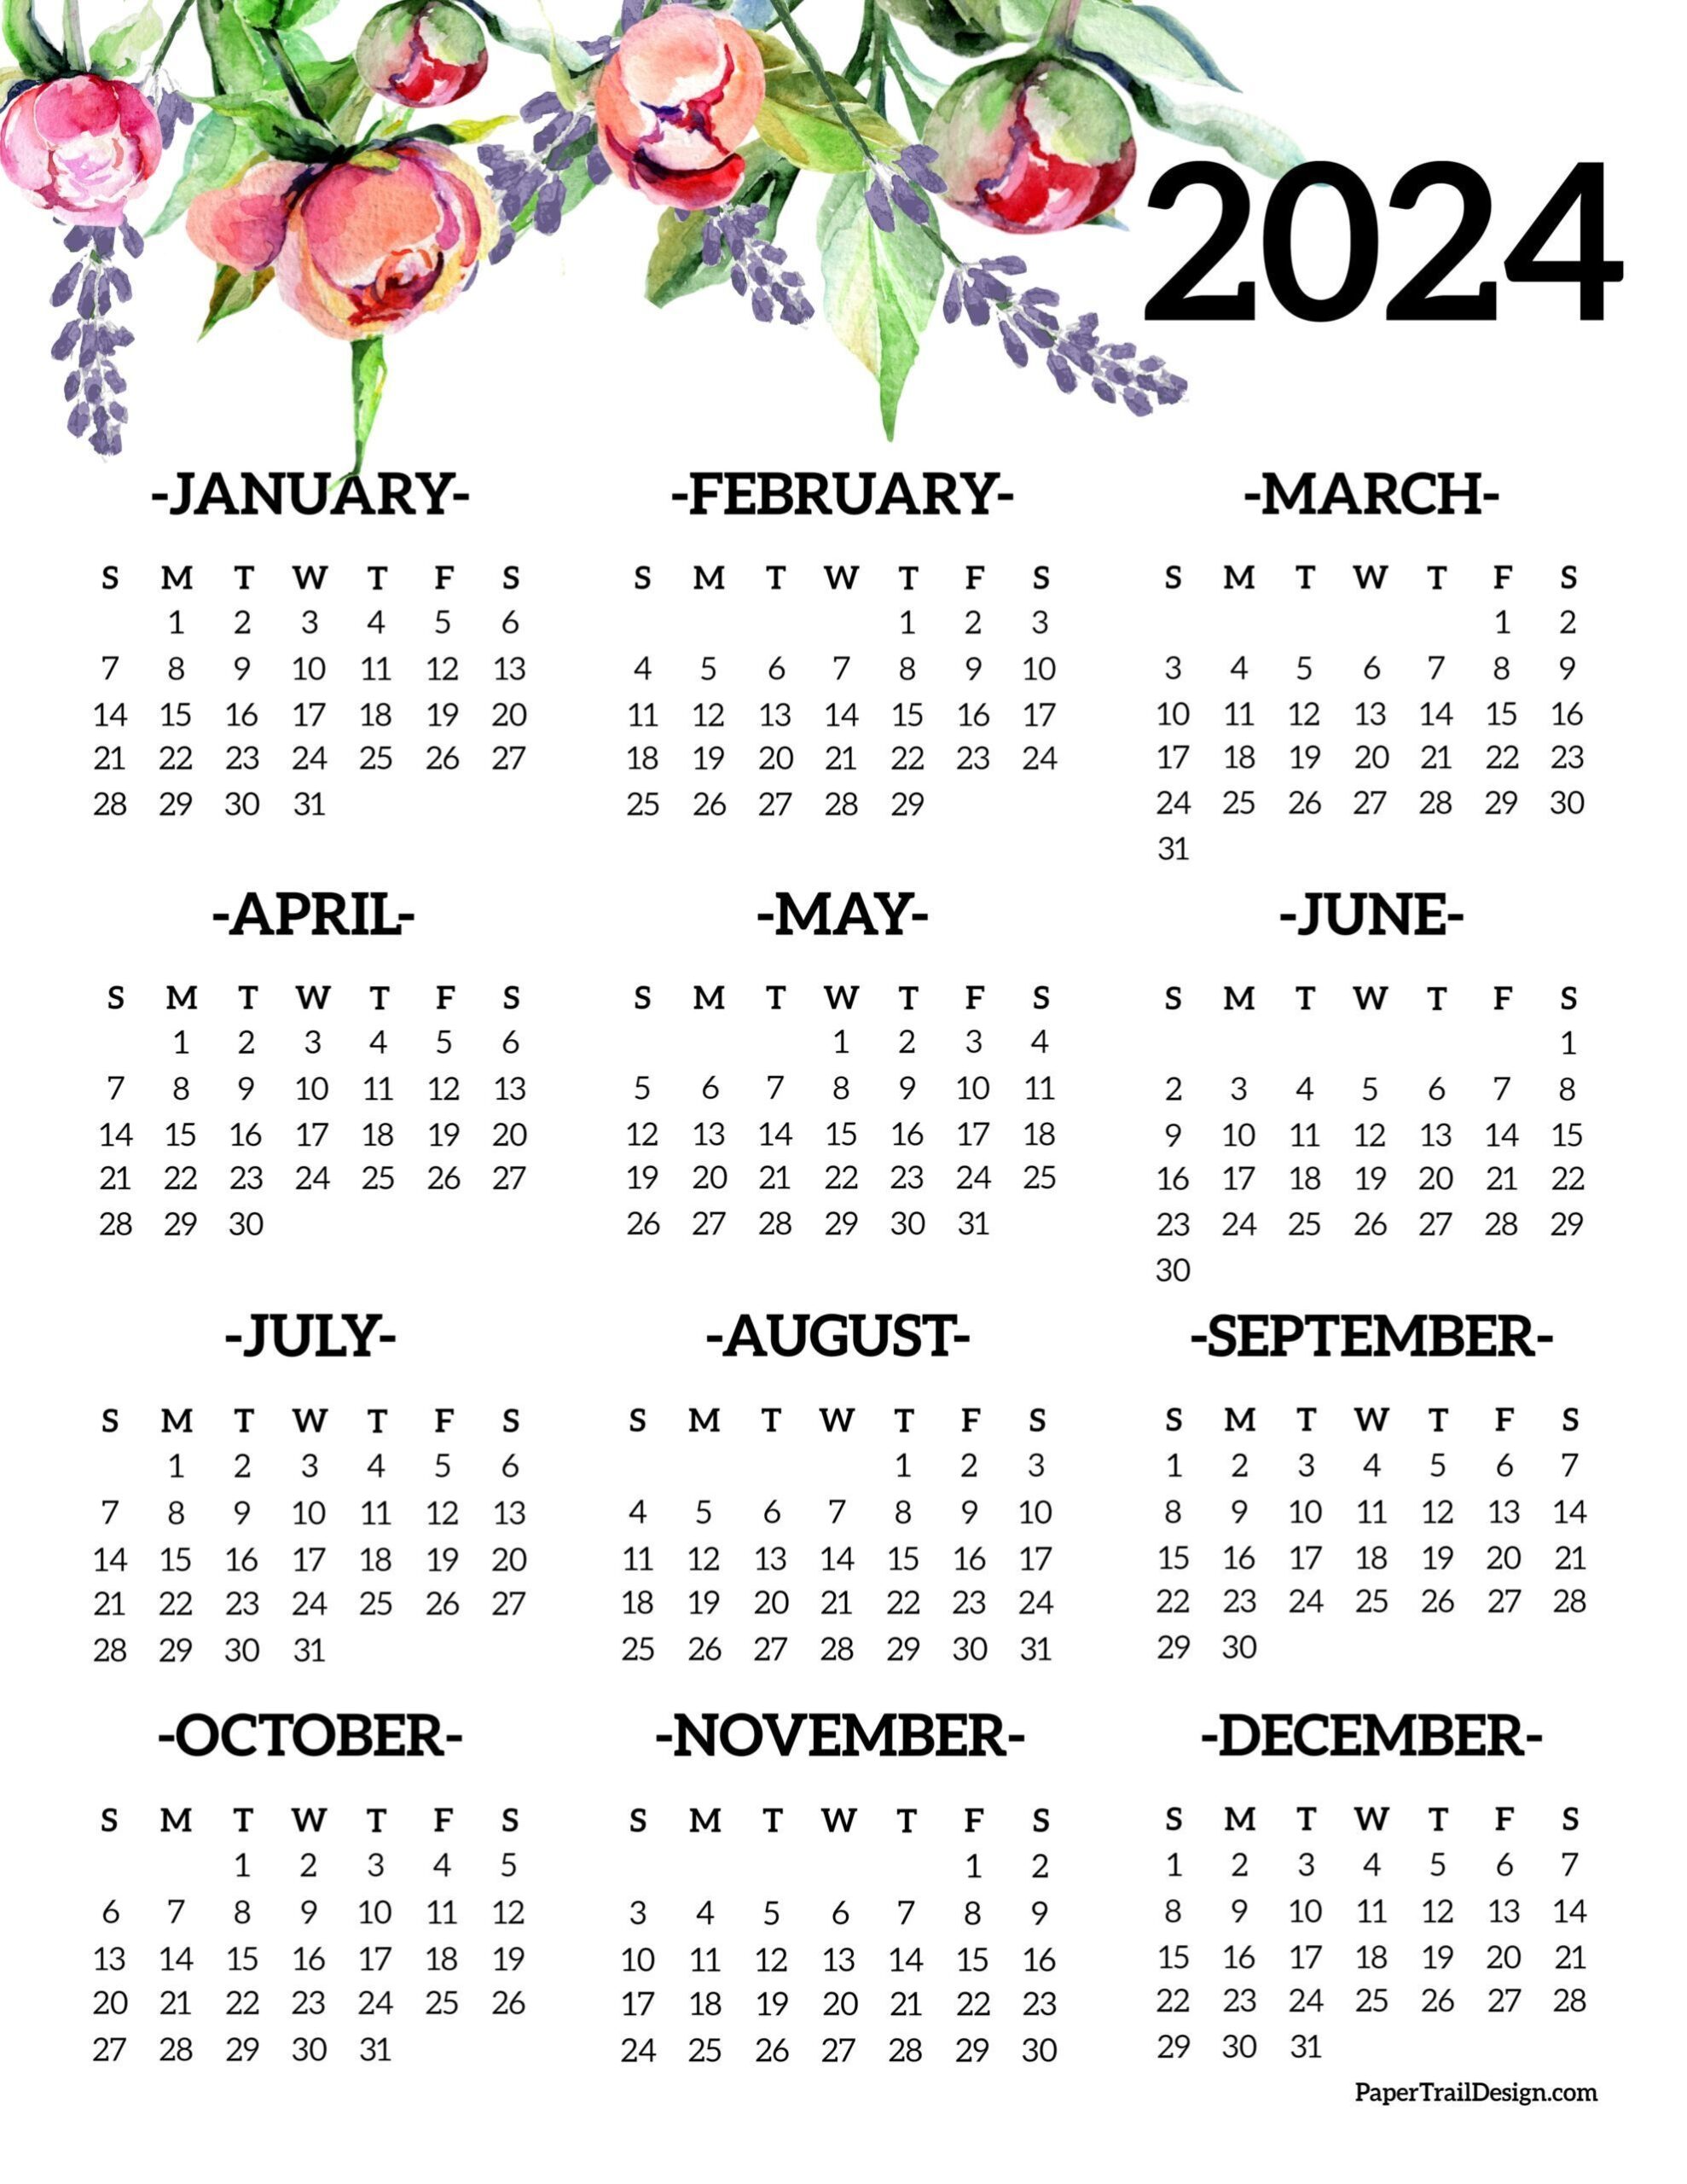 Calendar 2024 Printable One Page | Paper Trail Design | Free throughout Free Printable Calendar 2024 Bookmark